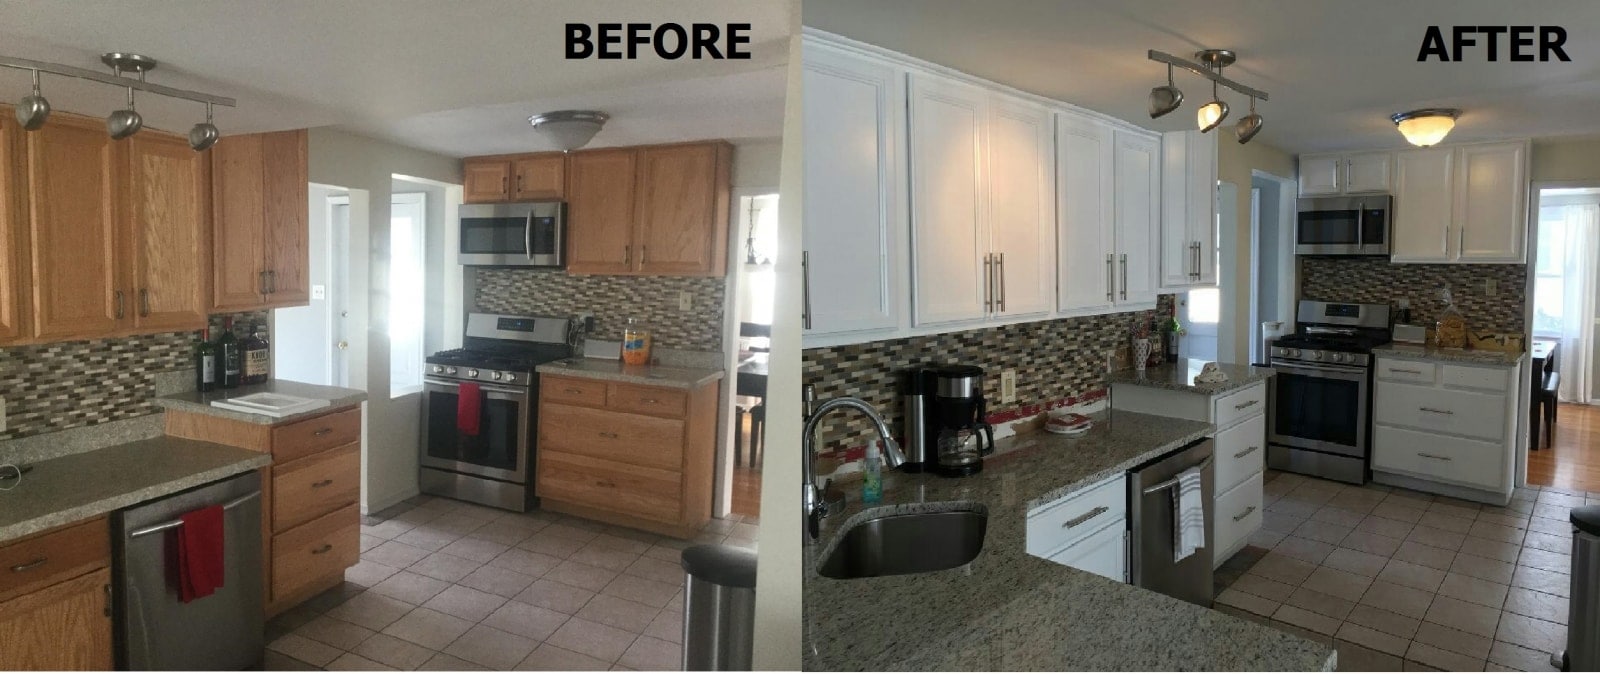 Before and After Kitchen Painting